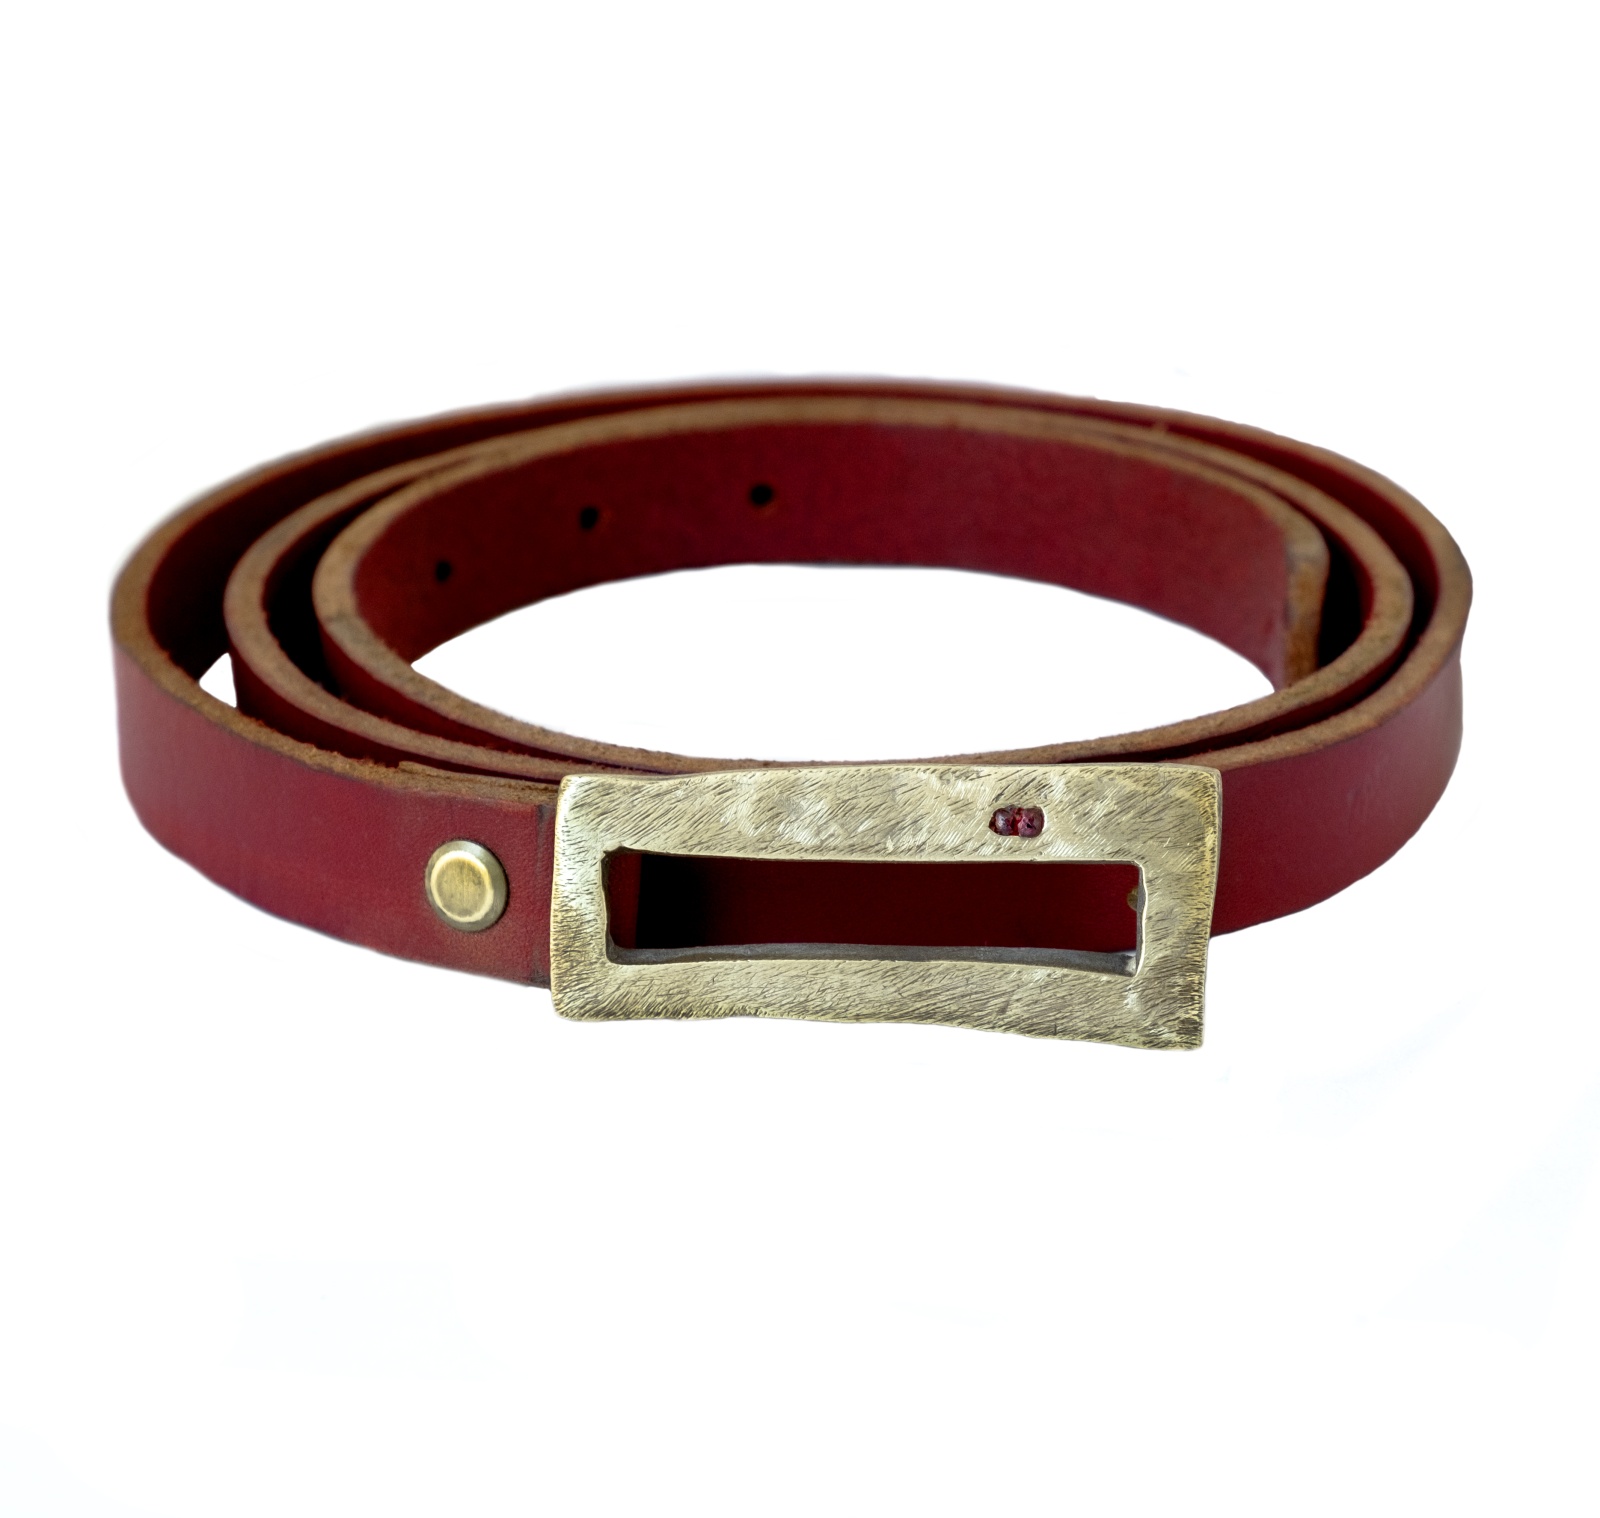 €275 
Free Shipping

Details

6cm X 2,5Cm Yellow Bronze Buckle
Prague Rough Garnet
Wide leather strap with five hole punches. For custom belt sizing please contact us
High Polished Finish
Nickel-free
Handmade
Engraved with Patrizia Casamirra Jewels Logo
